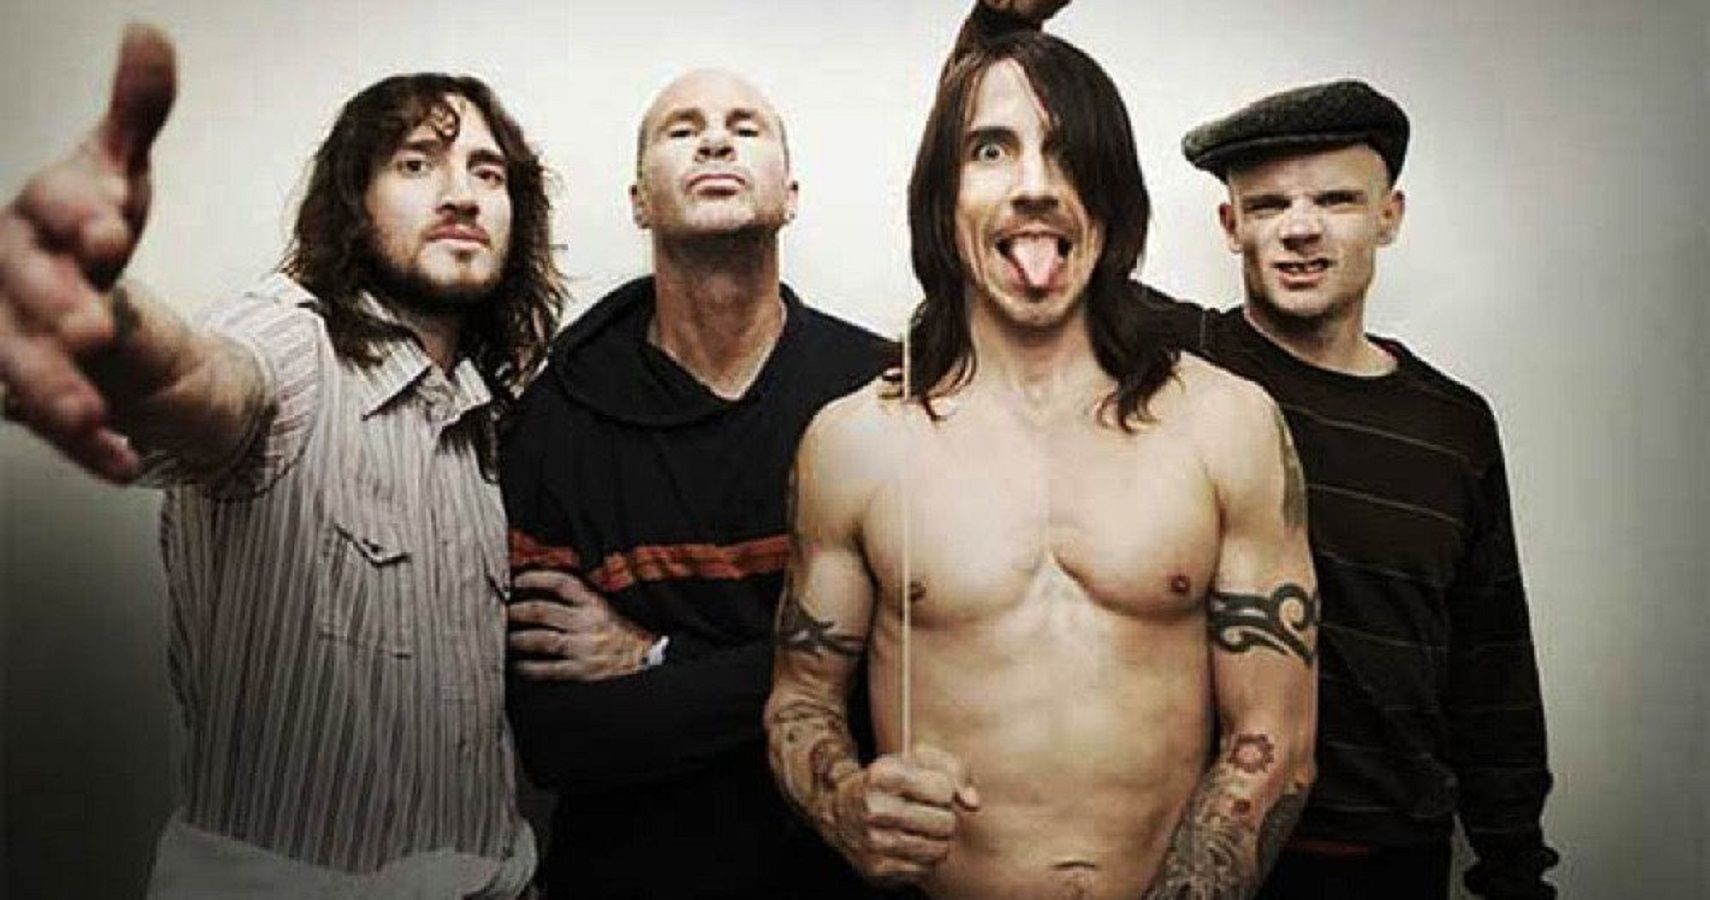 The Net Worth Of The Band Members Of Red Hot Chili Peppers, Ranked